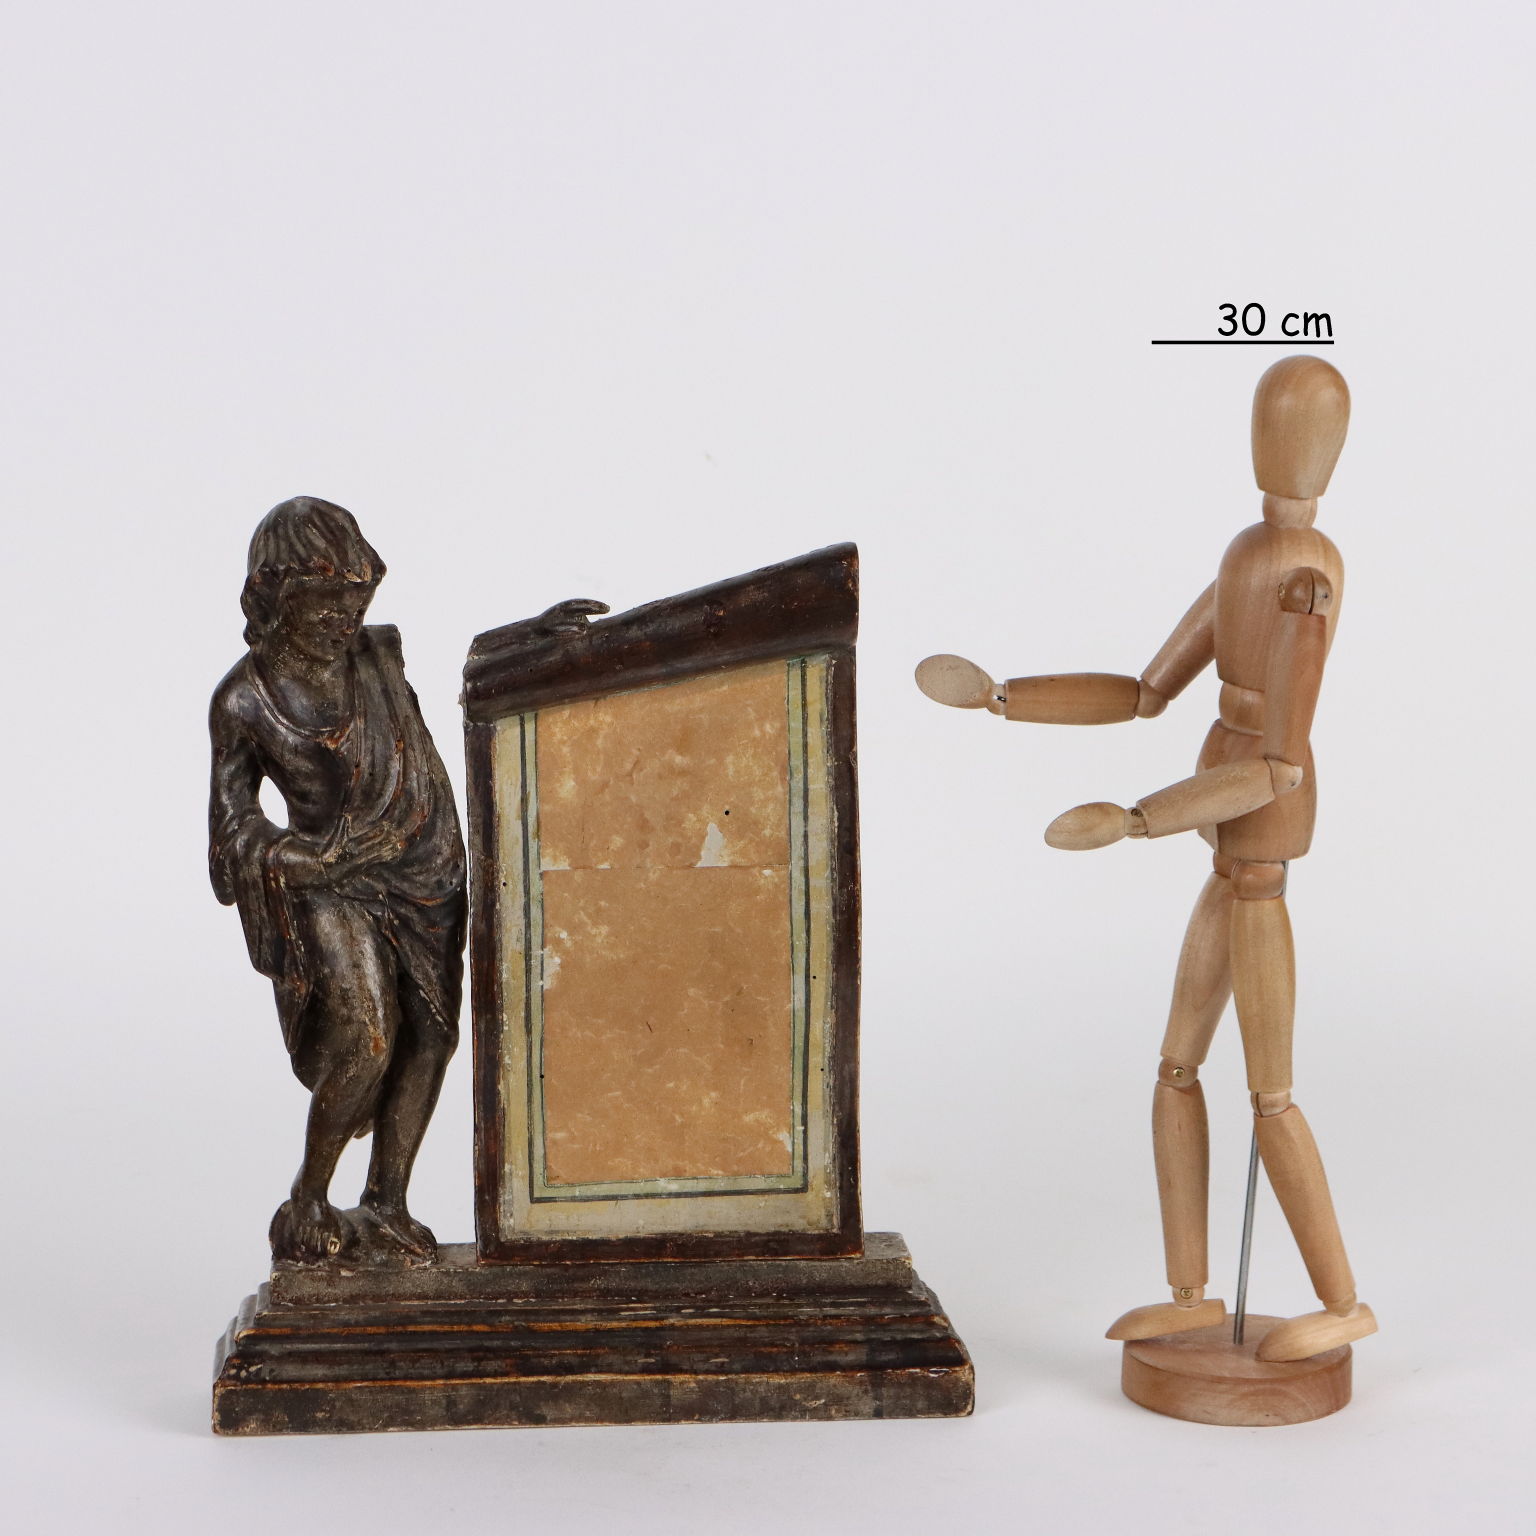 Ancient Cartouche Holder and Sculpture from the XVIII Century Wood